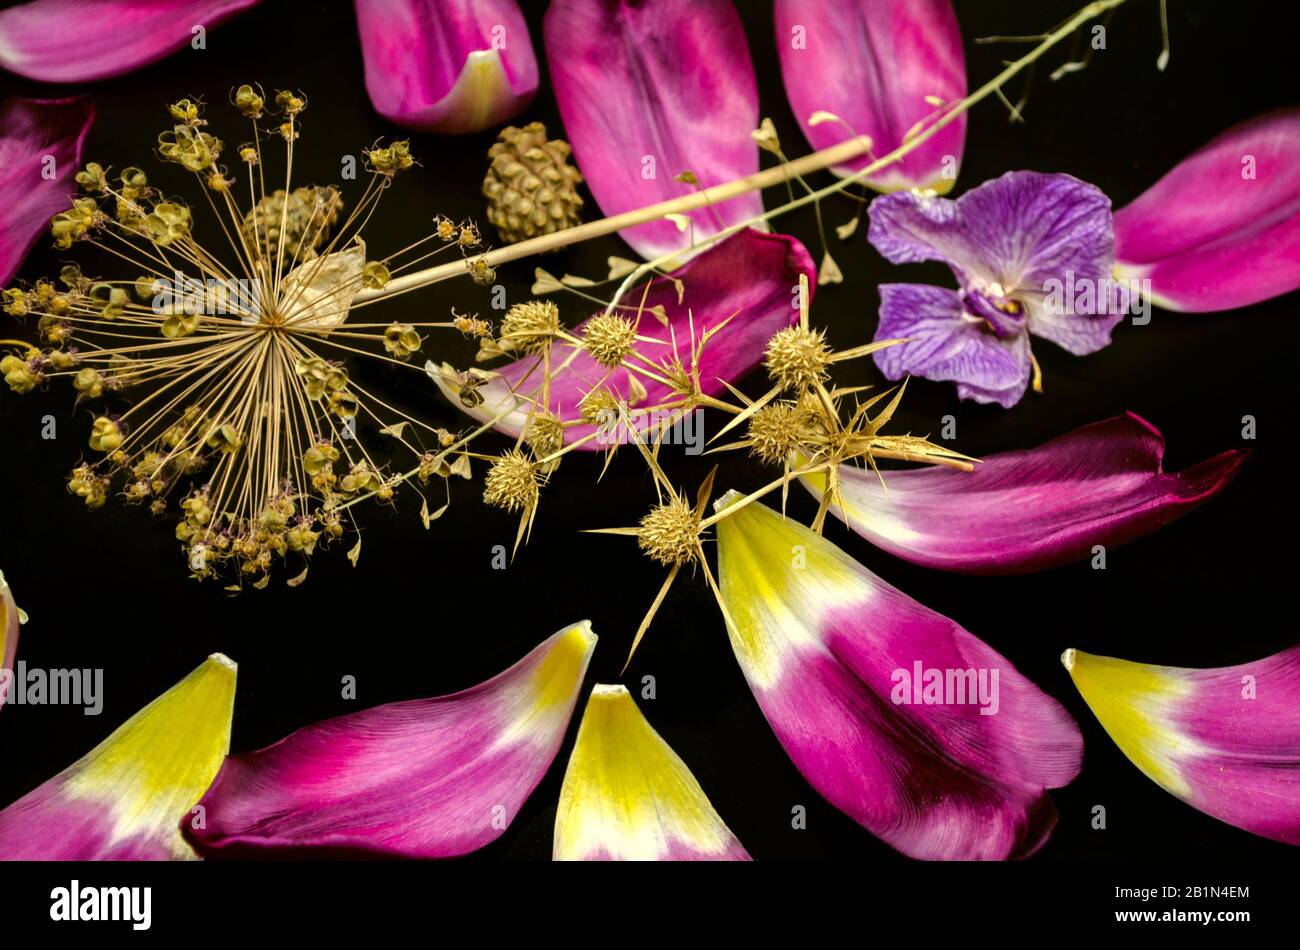 Black background with thorns,decorative Allium,dry branch of a shepherd's bag,fading orchid, coniferous cones and sparkling purple Tulip petals Stock Photo